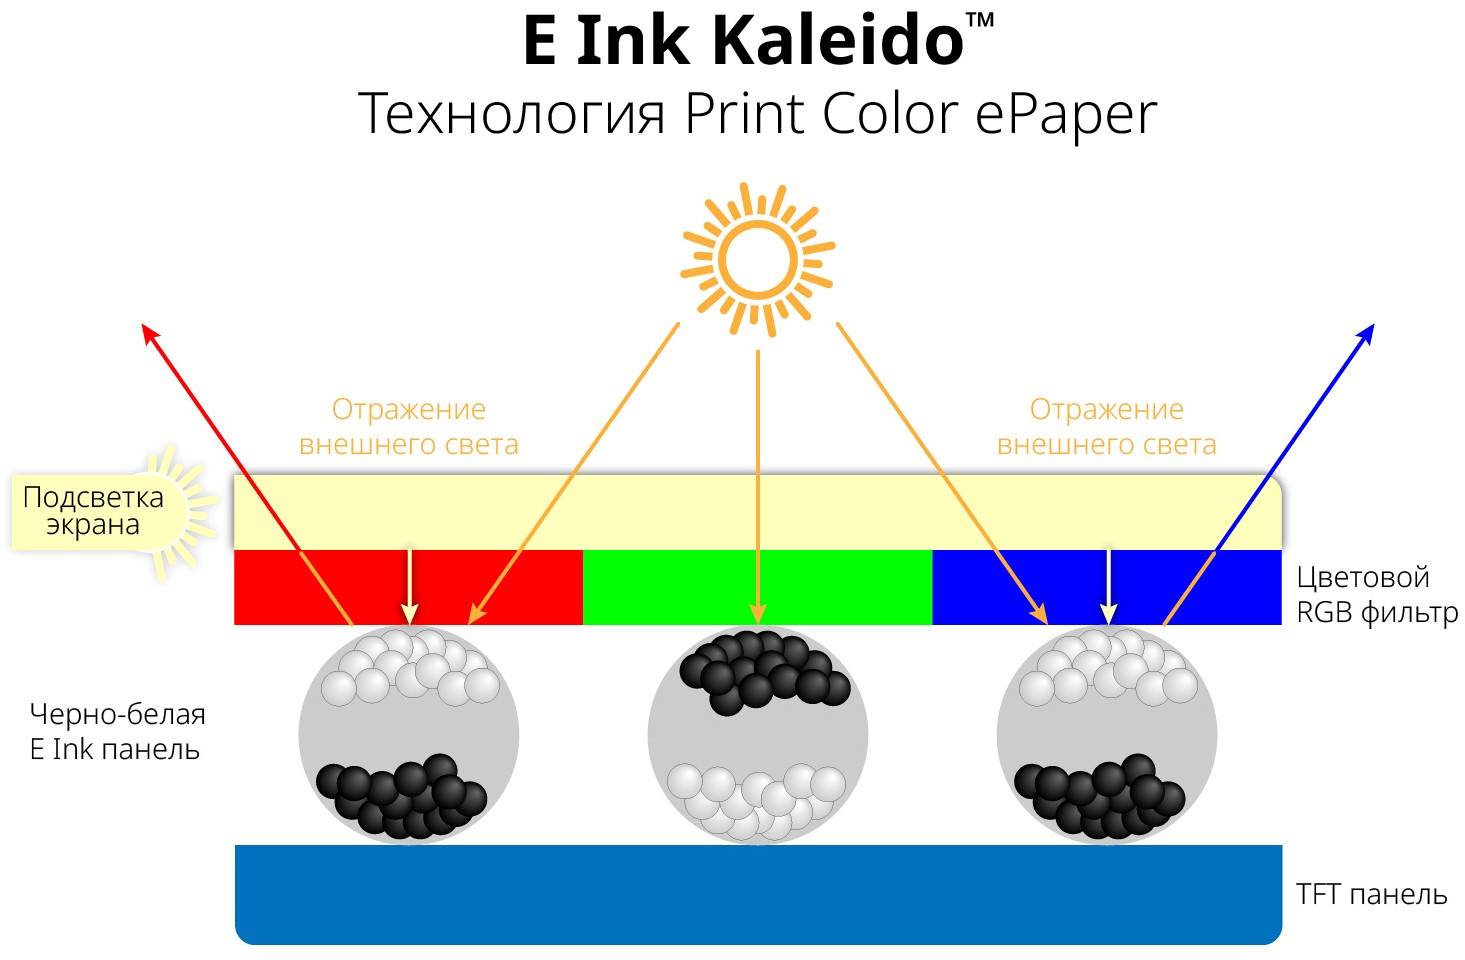 Discussion with Eldar Murtazin: alternative opinion about the first color reader with E Ink Kaleido